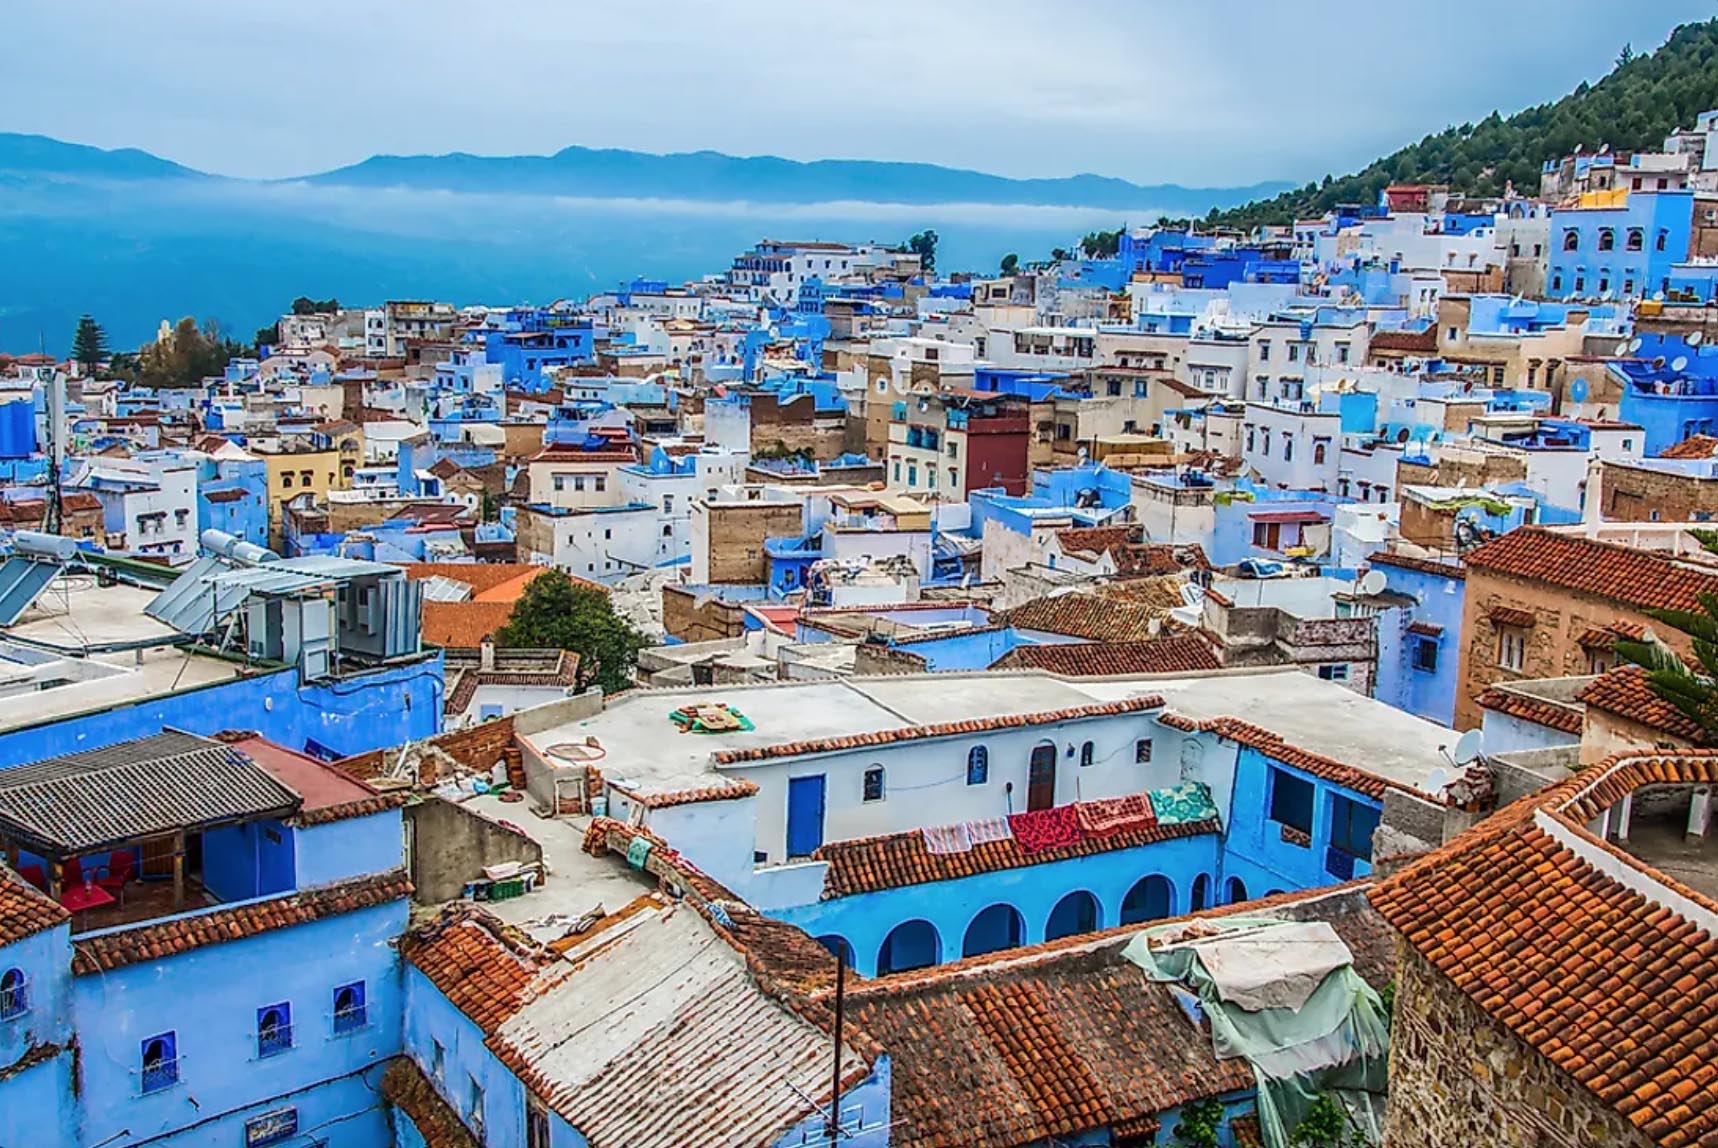 <p><span><span><span><span><span><span>Chefchaouen is a magical blue village in the heart of Morocco's Rif Mountains. Visitors say it's almost like the town is painted in various shades of blue from the palest sky at dawn to the deepest midnight. Walking through its narrow lanes, you'll feel as though you've stepped into a dream, with each corner unveiling a new azure mystery. Local craftspeople sell unique handmade goods, from woven rugs to ornate jewelry, perfect for memorable souvenirs. Sipping mint tea in the peaceful squares, you'll quickly find yourself greeted by the friendly locals who are as inviting as the town itself. Surrounded by the natural beauty of the local mountains, it's an ideal spot for hikers and photographers. Chefchaouen offers a peaceful escape from the endless hustle of city life, allowing travelers to bask in its cool, calm, and captivating atmosphere.</span></span></span></span></span></span></p>